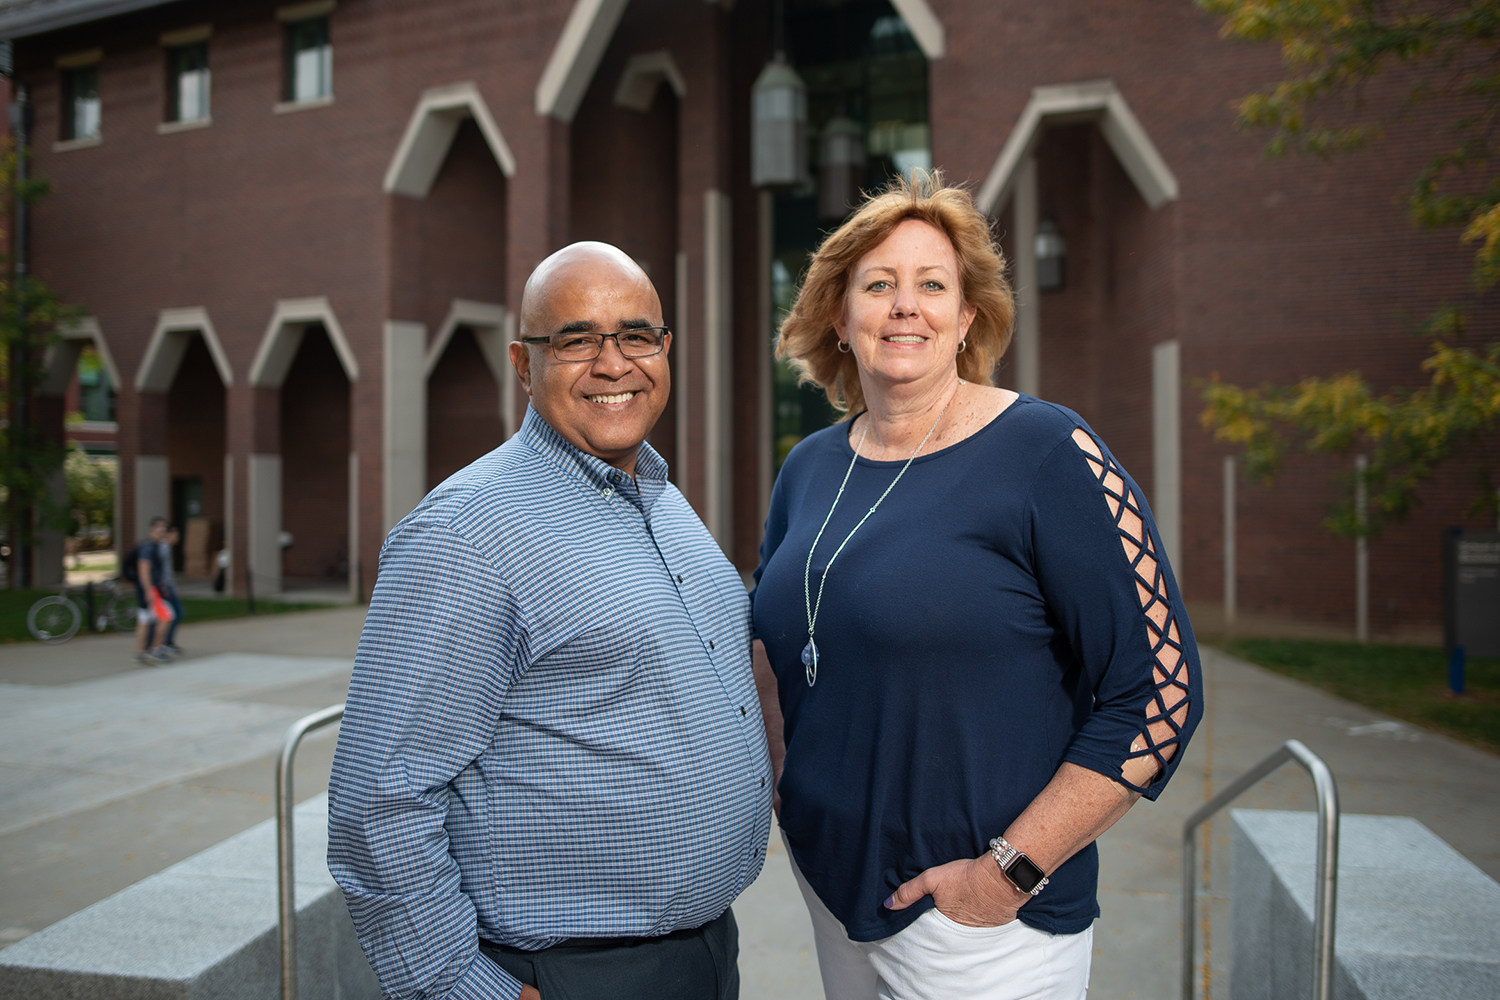 Jose M. Cruz (left) and Lucy Gilson (right) have been named associate deans in the UConn School of Business. Gilson has taken on the mantle of associate dean for faculty and outreach, while Cruz is now the associate dean for graduate programs. (Nathan Oldham / UConn School of Business)